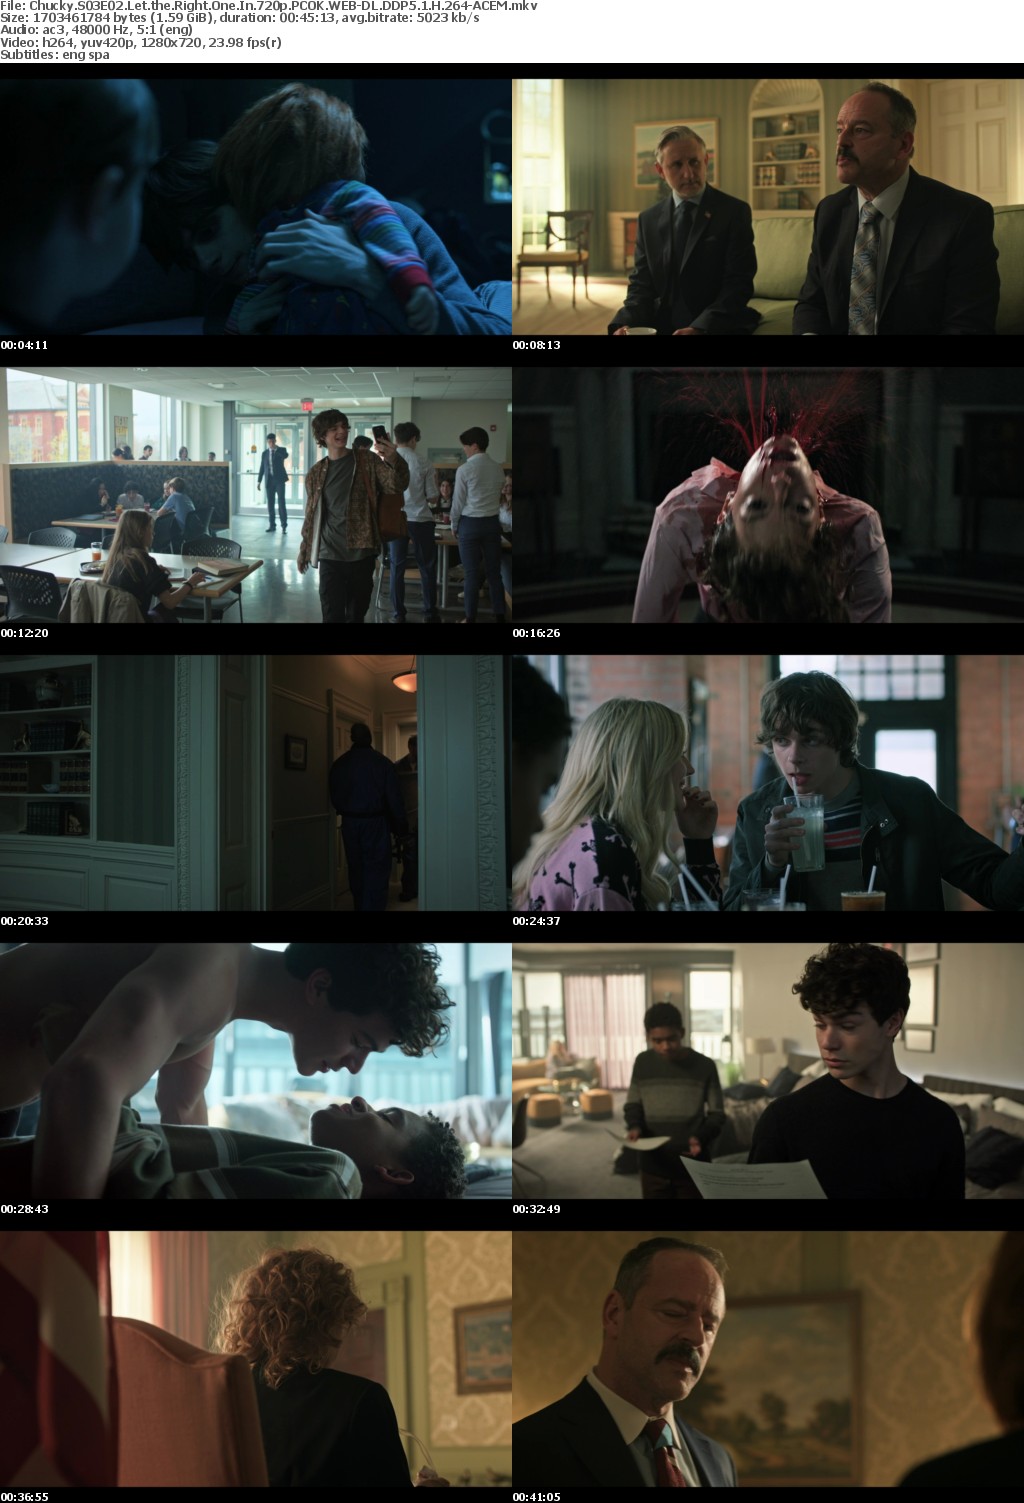 Chucky S03E02 Let the Right One In 720p PCOK WEB-DL DDP5 1 H 264-ACEM